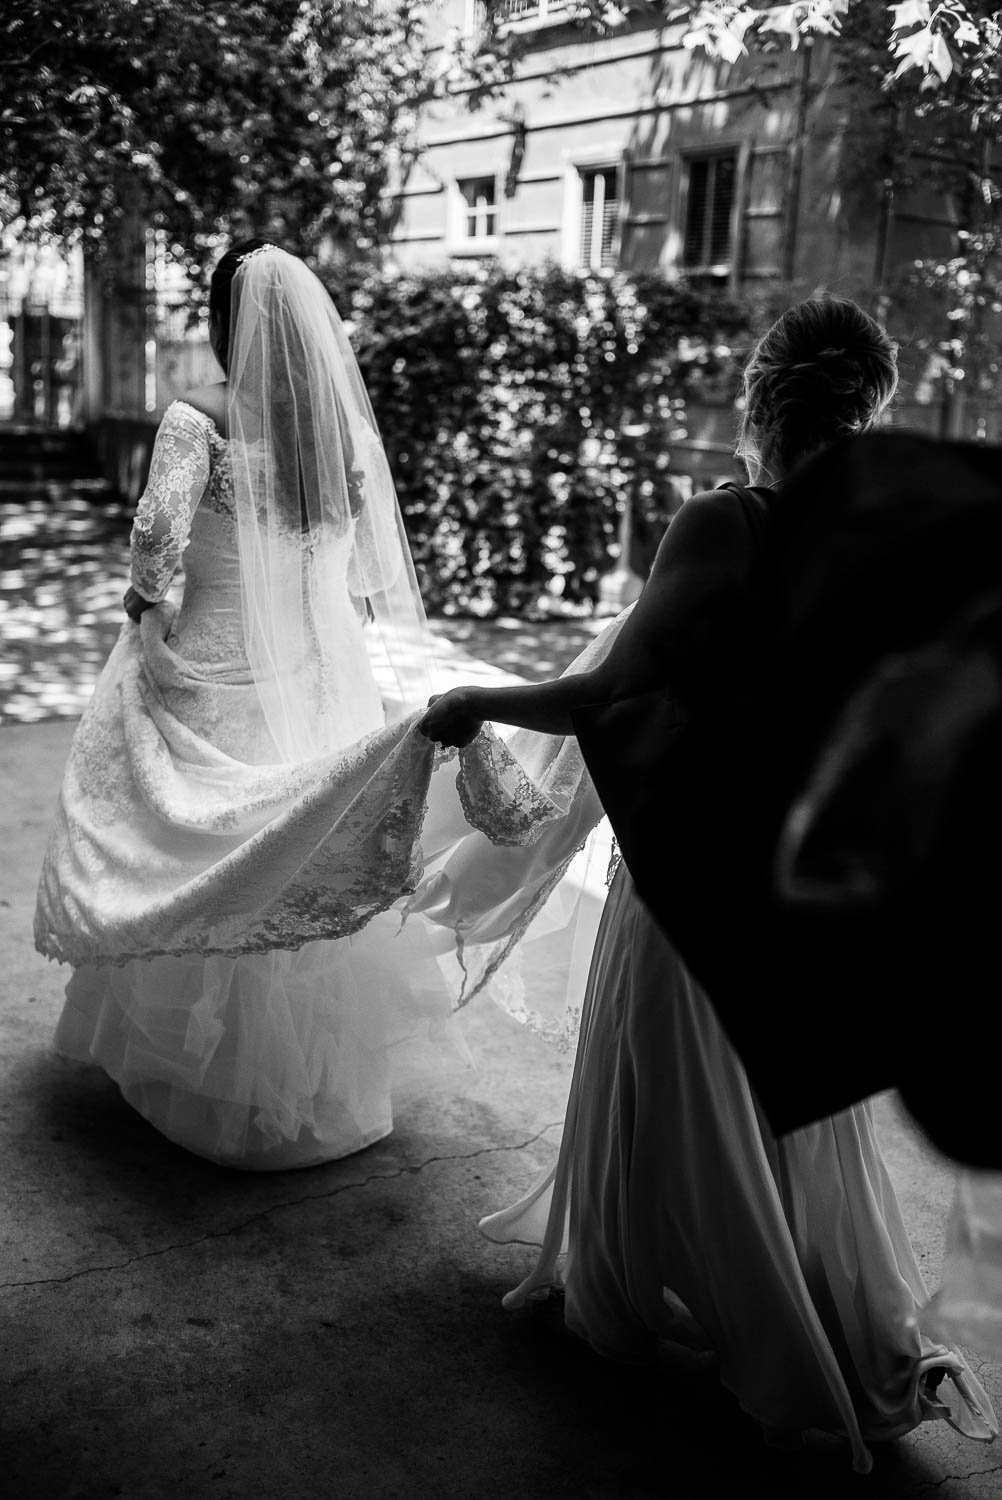 Friend assists with the brides dress at Za Za gardens-Leica photographer-Philip Thomas Photography